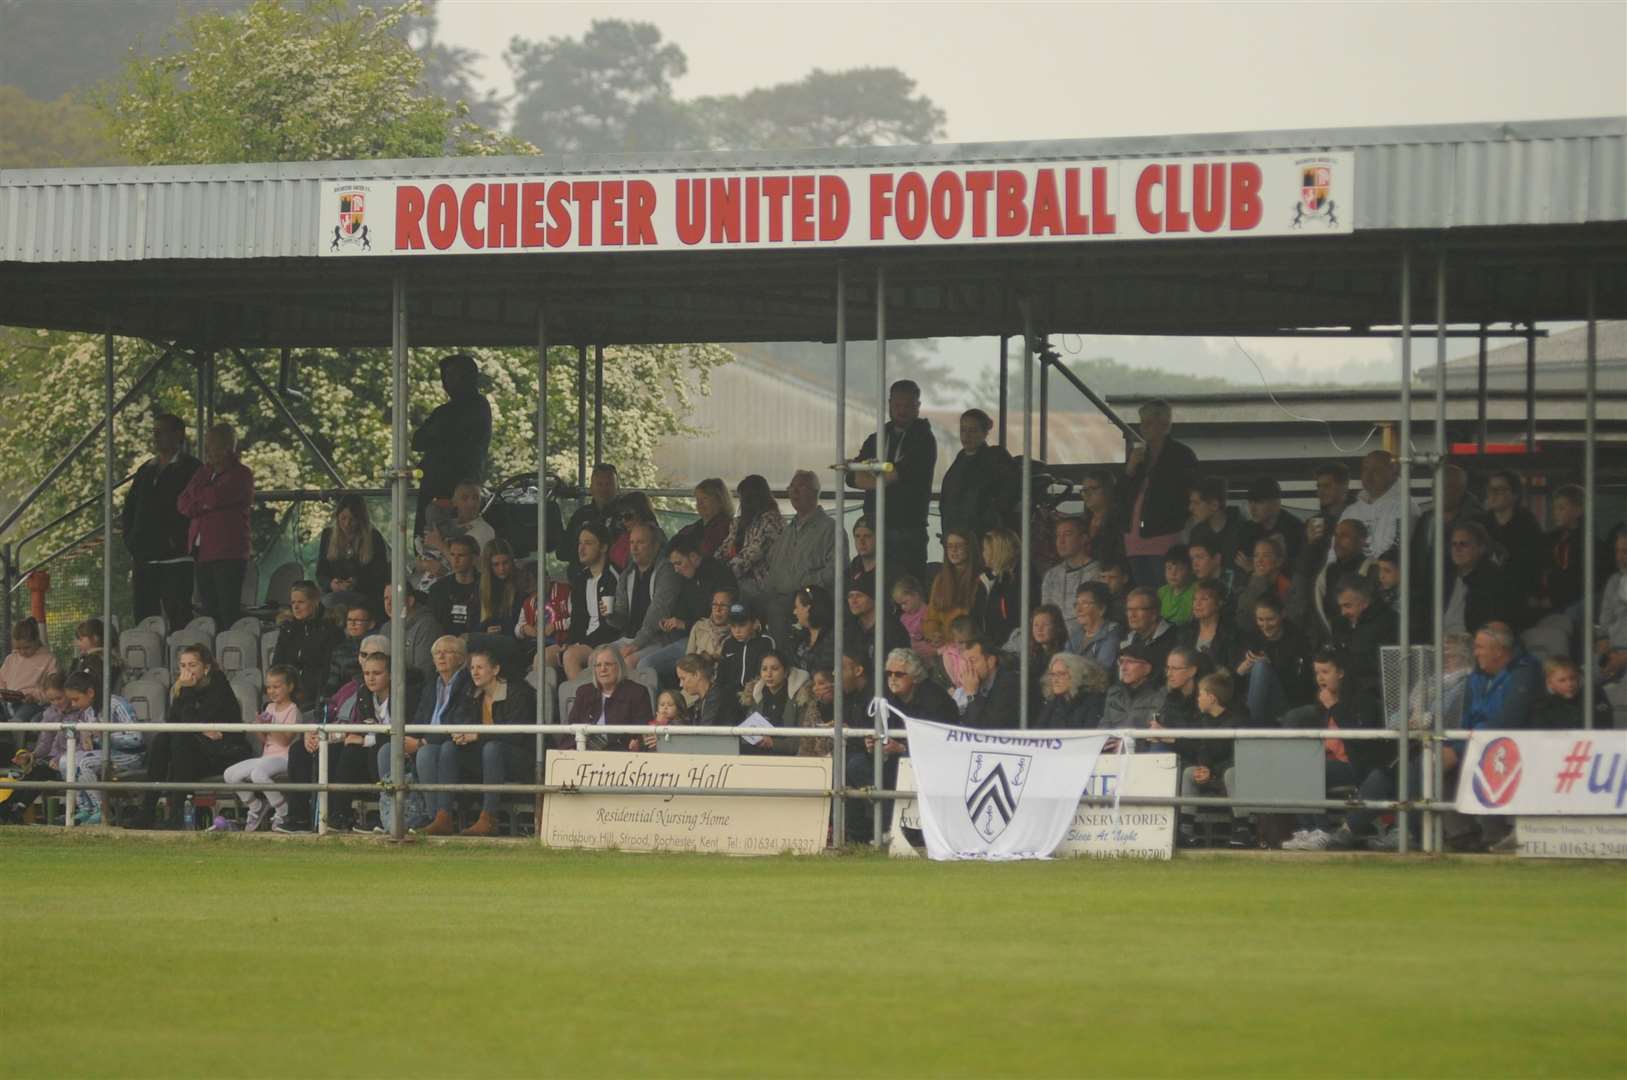 Rochester United's Rede Court Road ground Picture: Steve Crispe